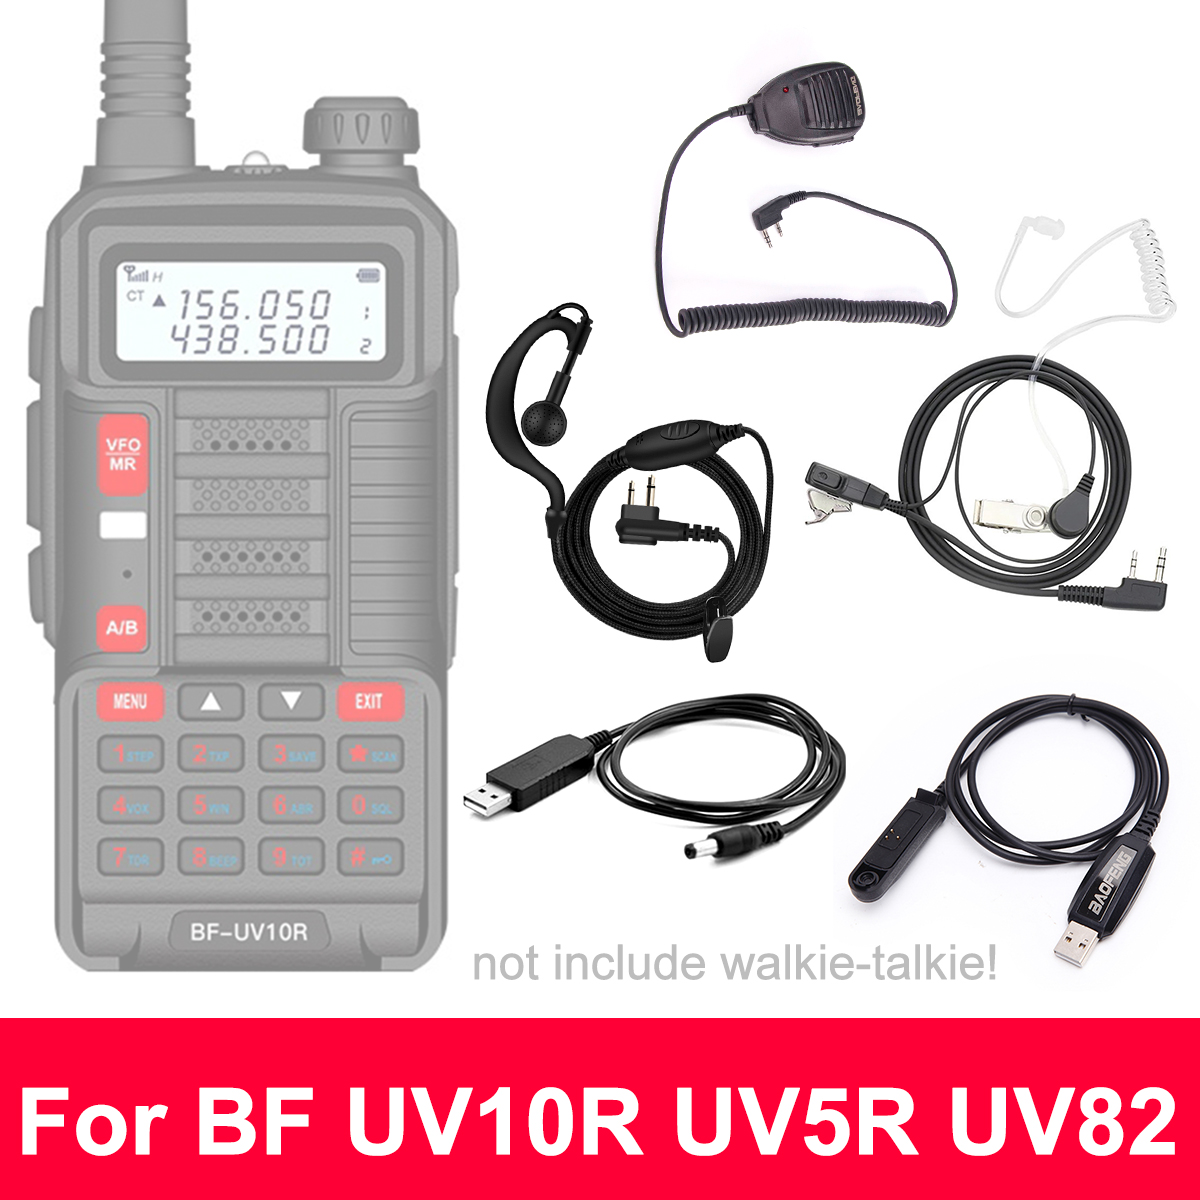 Walkie-Talkie-Accessories-Write-Frequency-Line-Headphones-USB-Car-Charger-Hand-Microphone-Two-Way-Ra-1837282-1